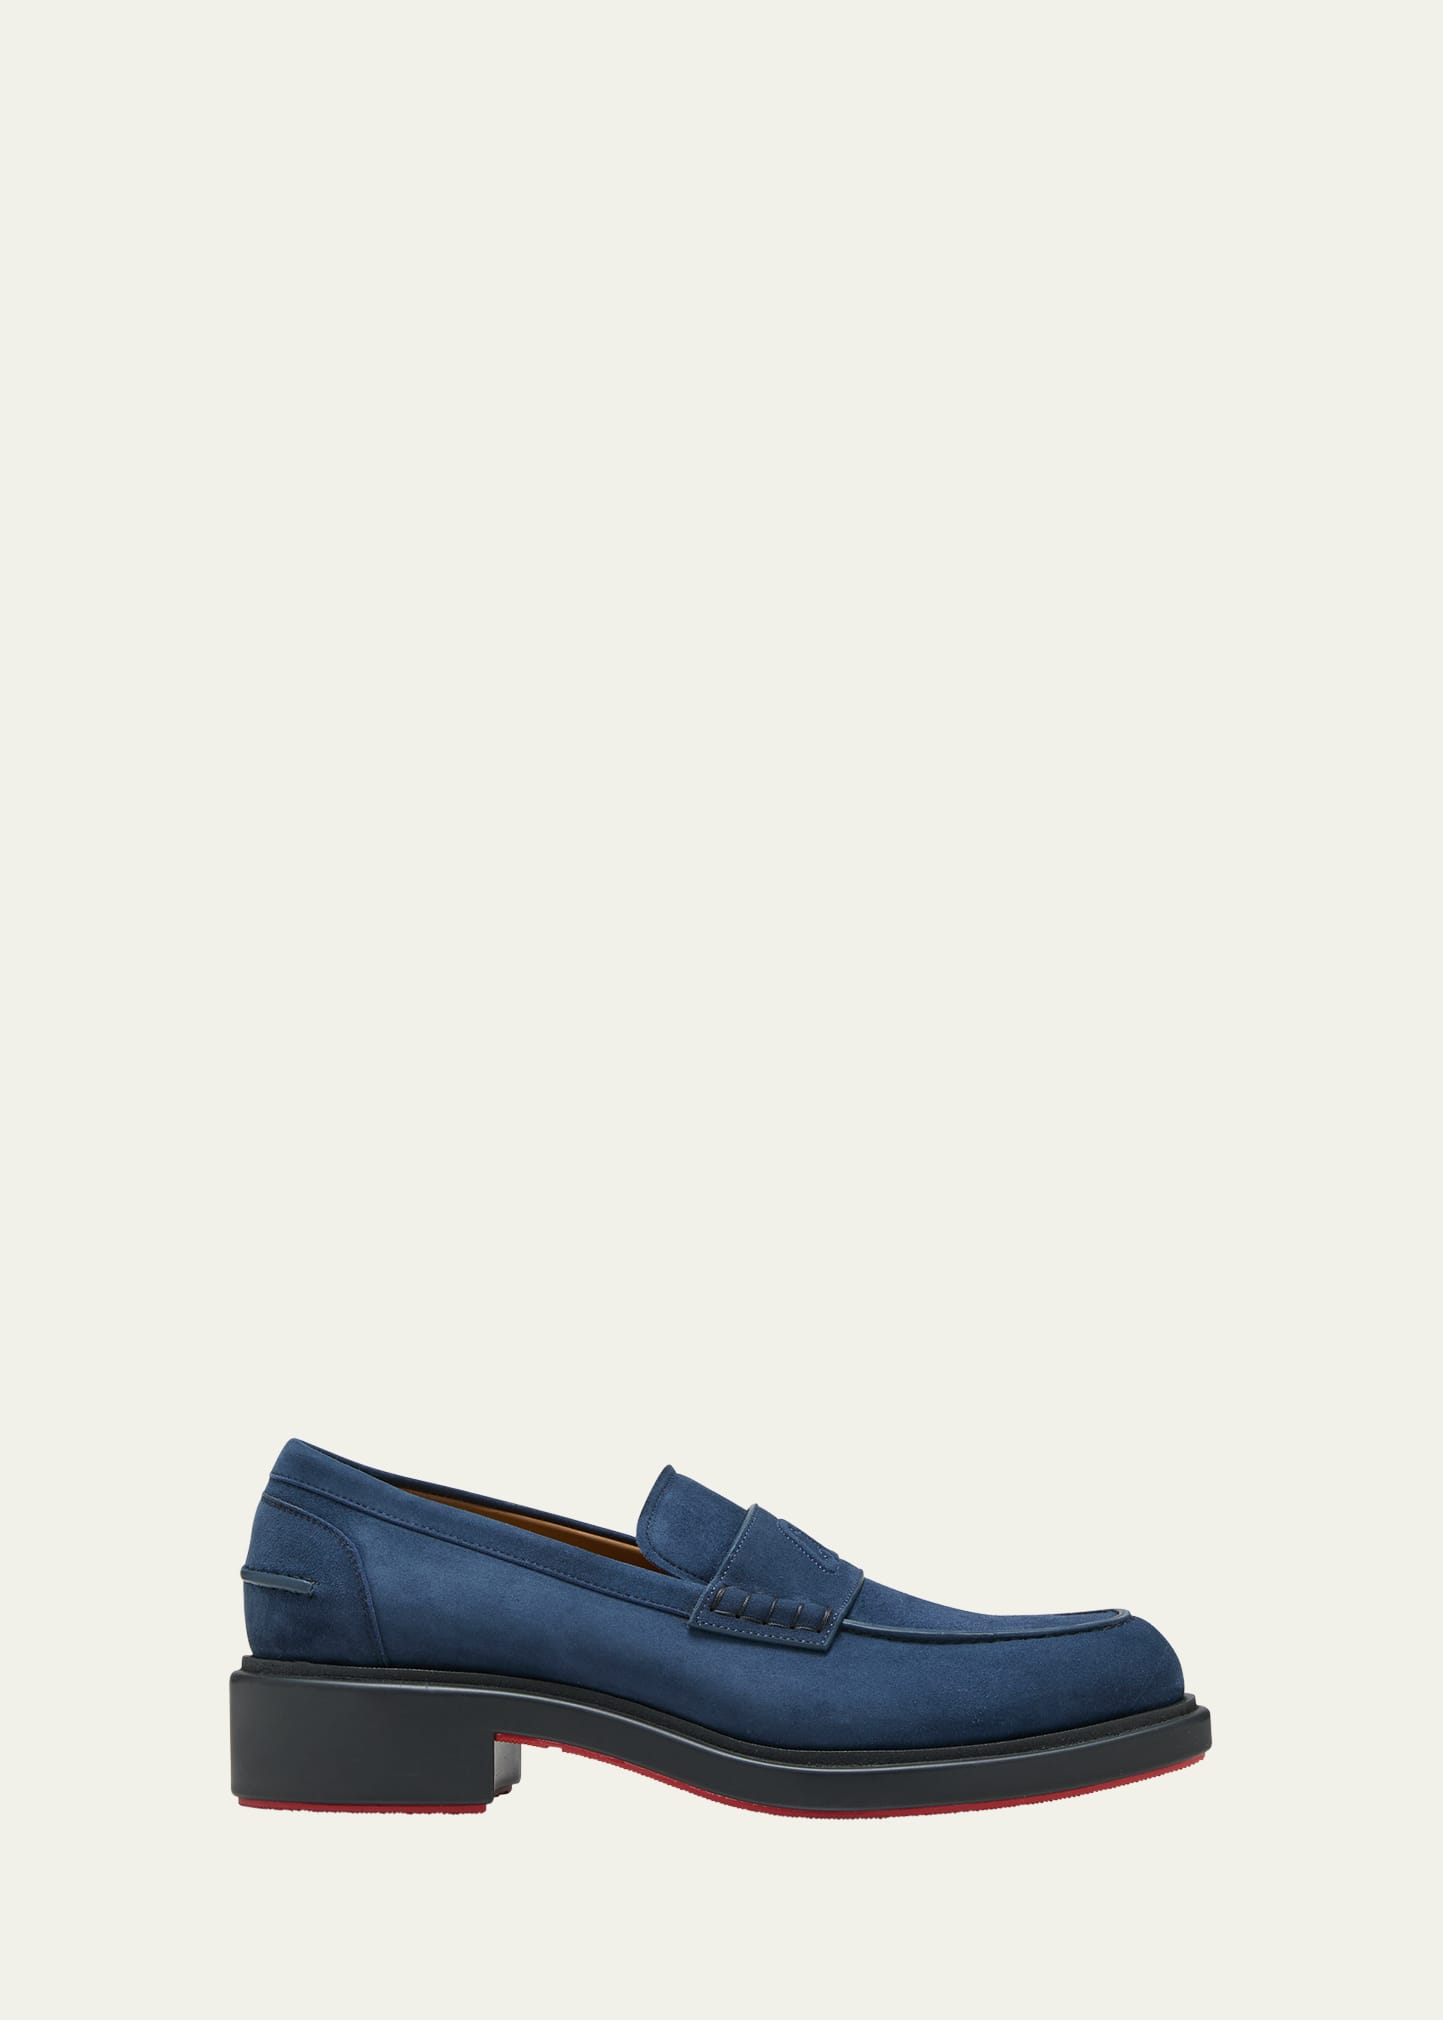 Men's Urbino Moc CL Suede Penny Loafers